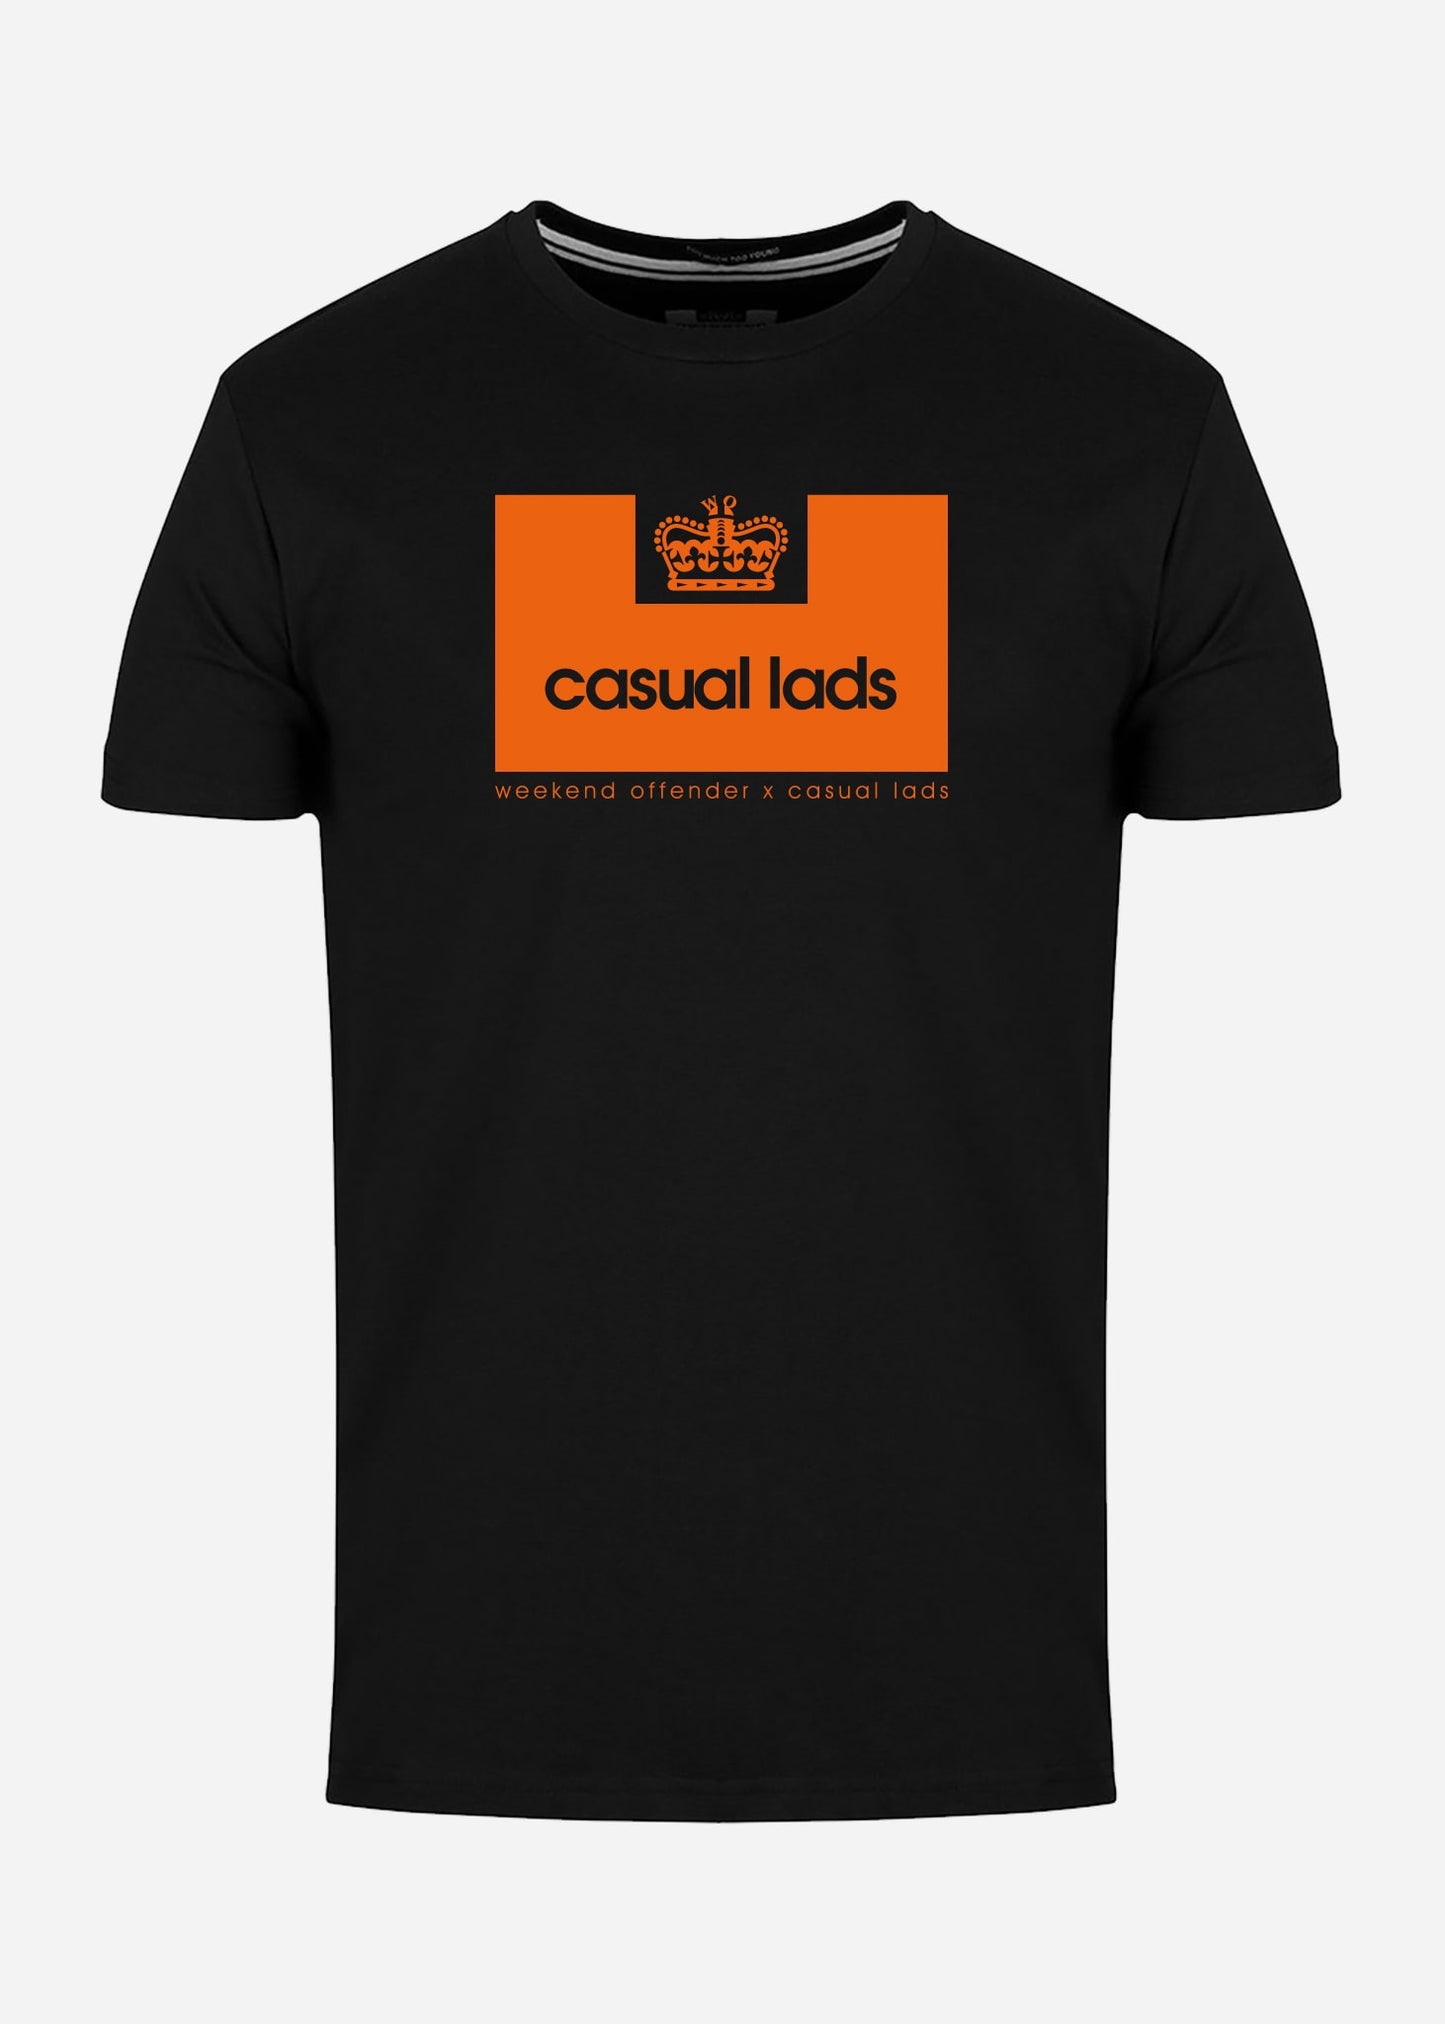 Weekend Offender T-shirts  Casual Lads X Weekend Offender Limited Edition Euro 2024 